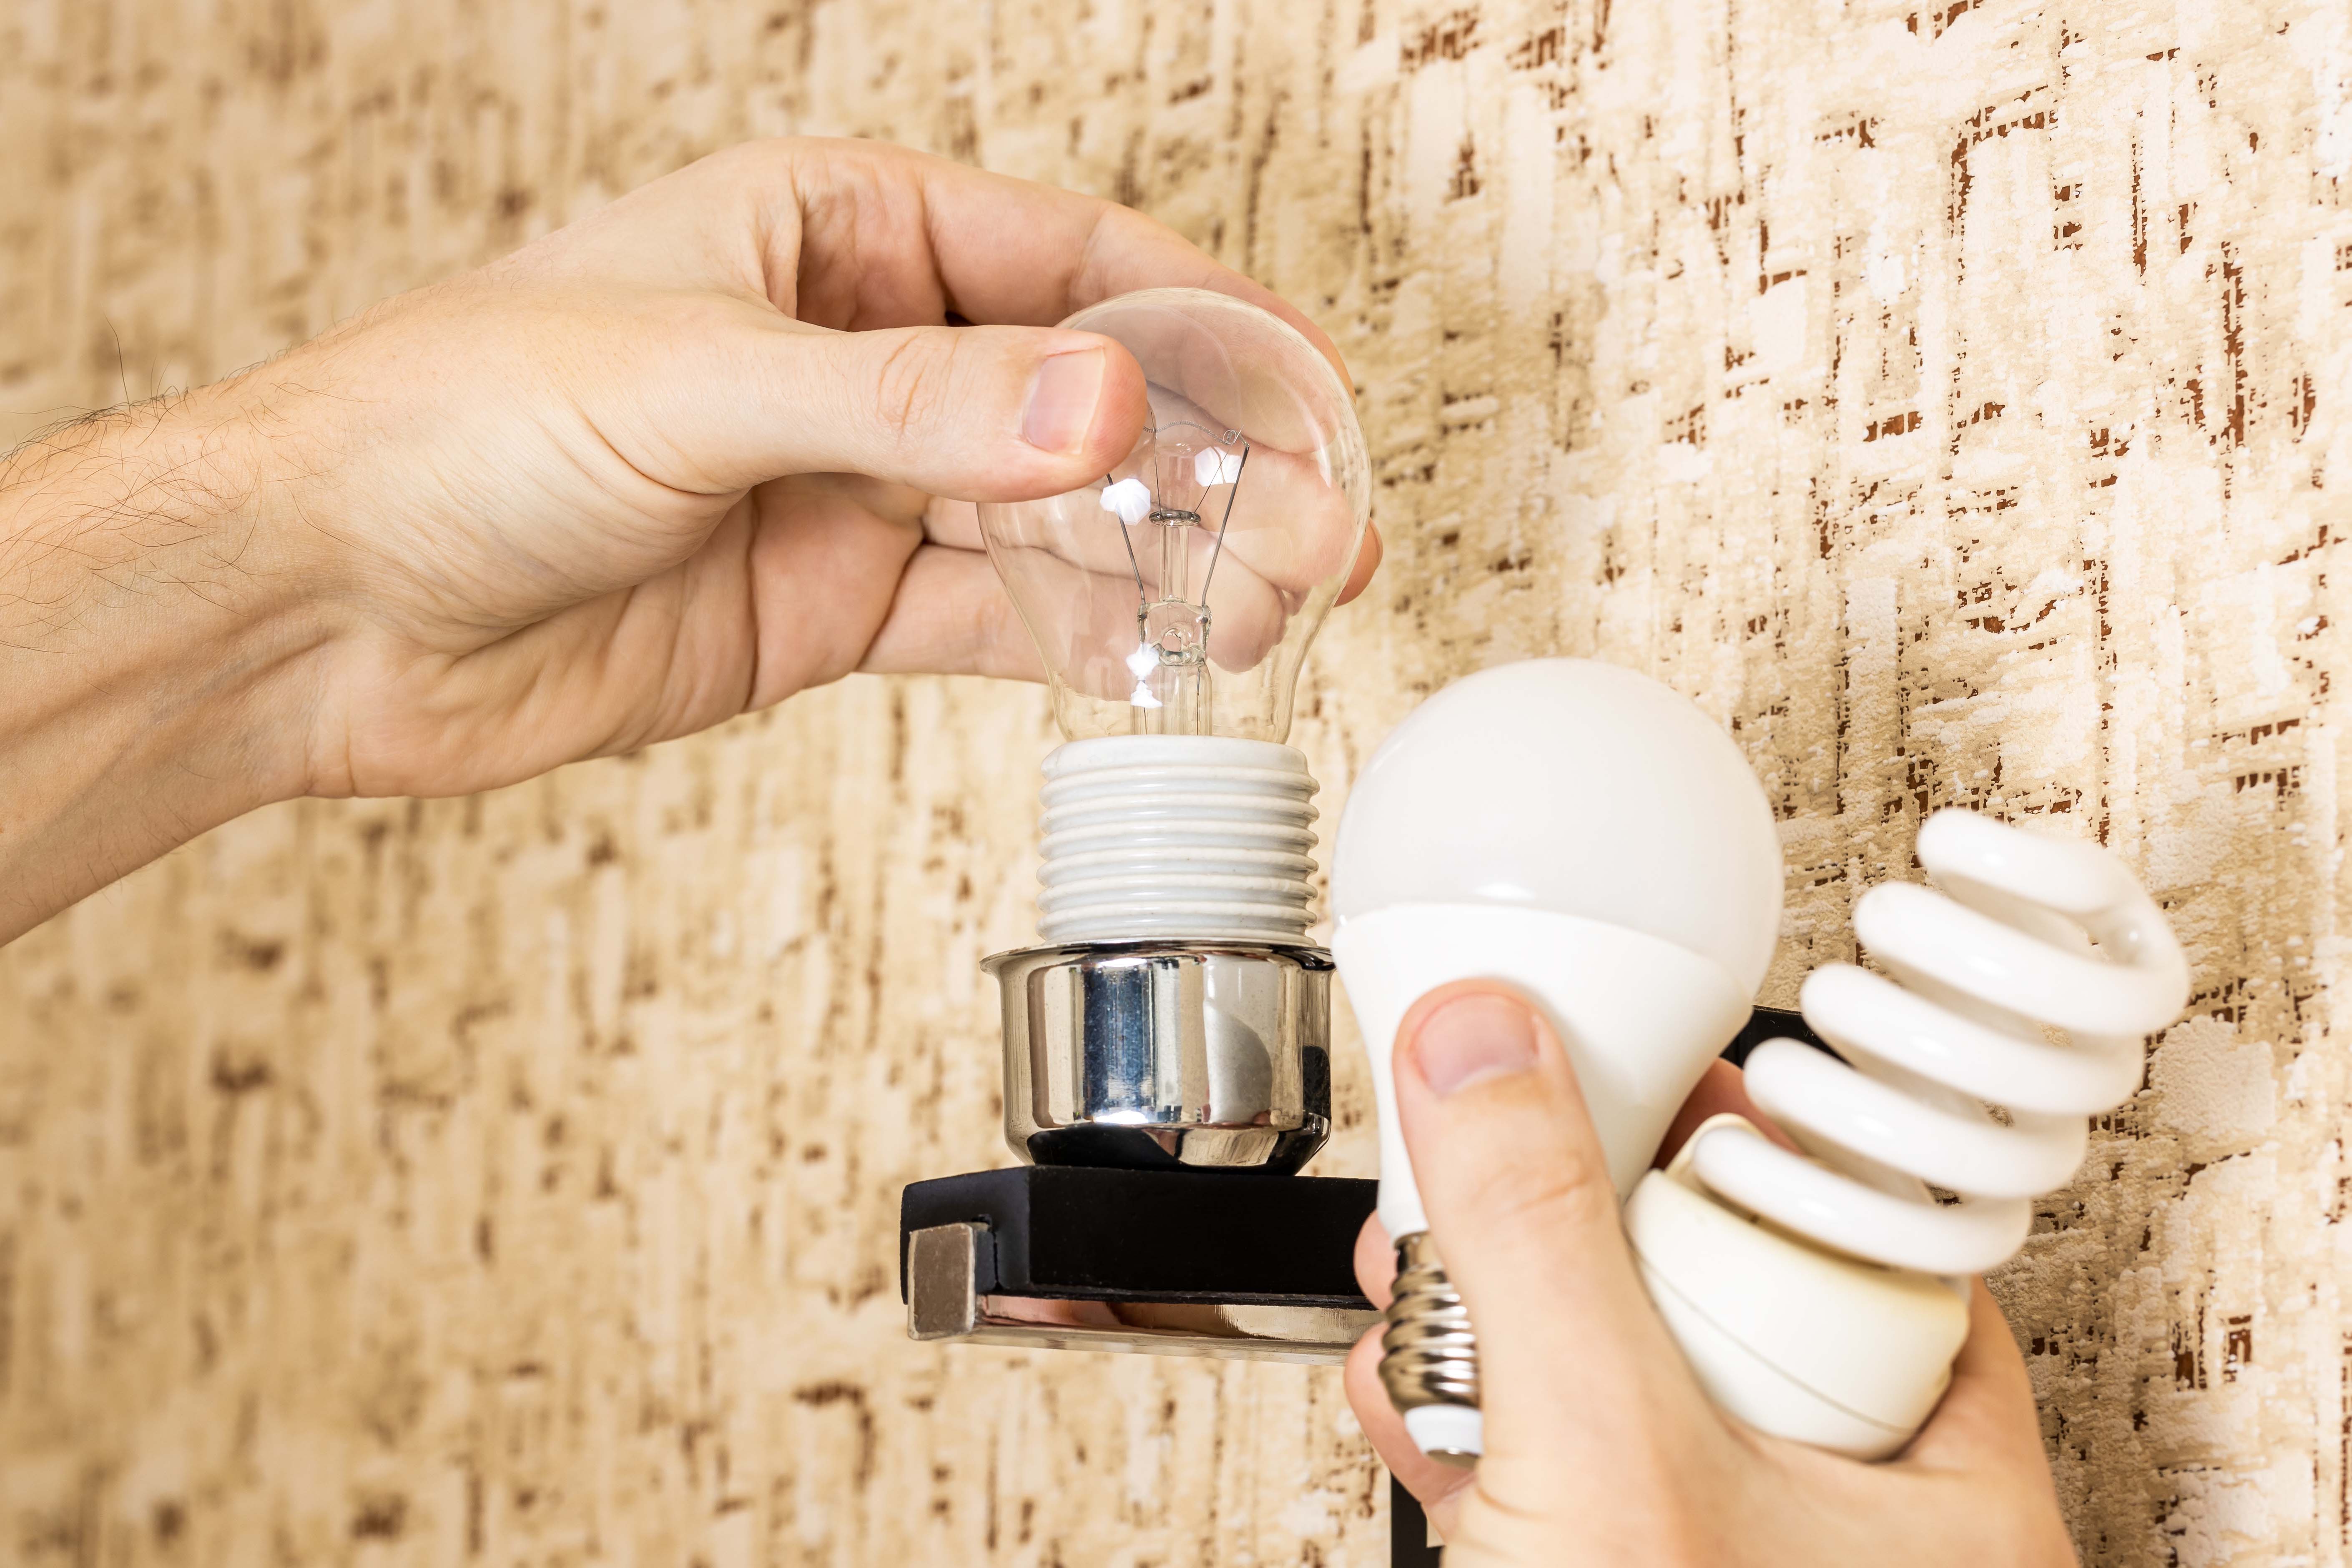 handyman changing electricity efficiency light bulb concept. various light bulbs at person hand. replacing lightbulb at wall lamp